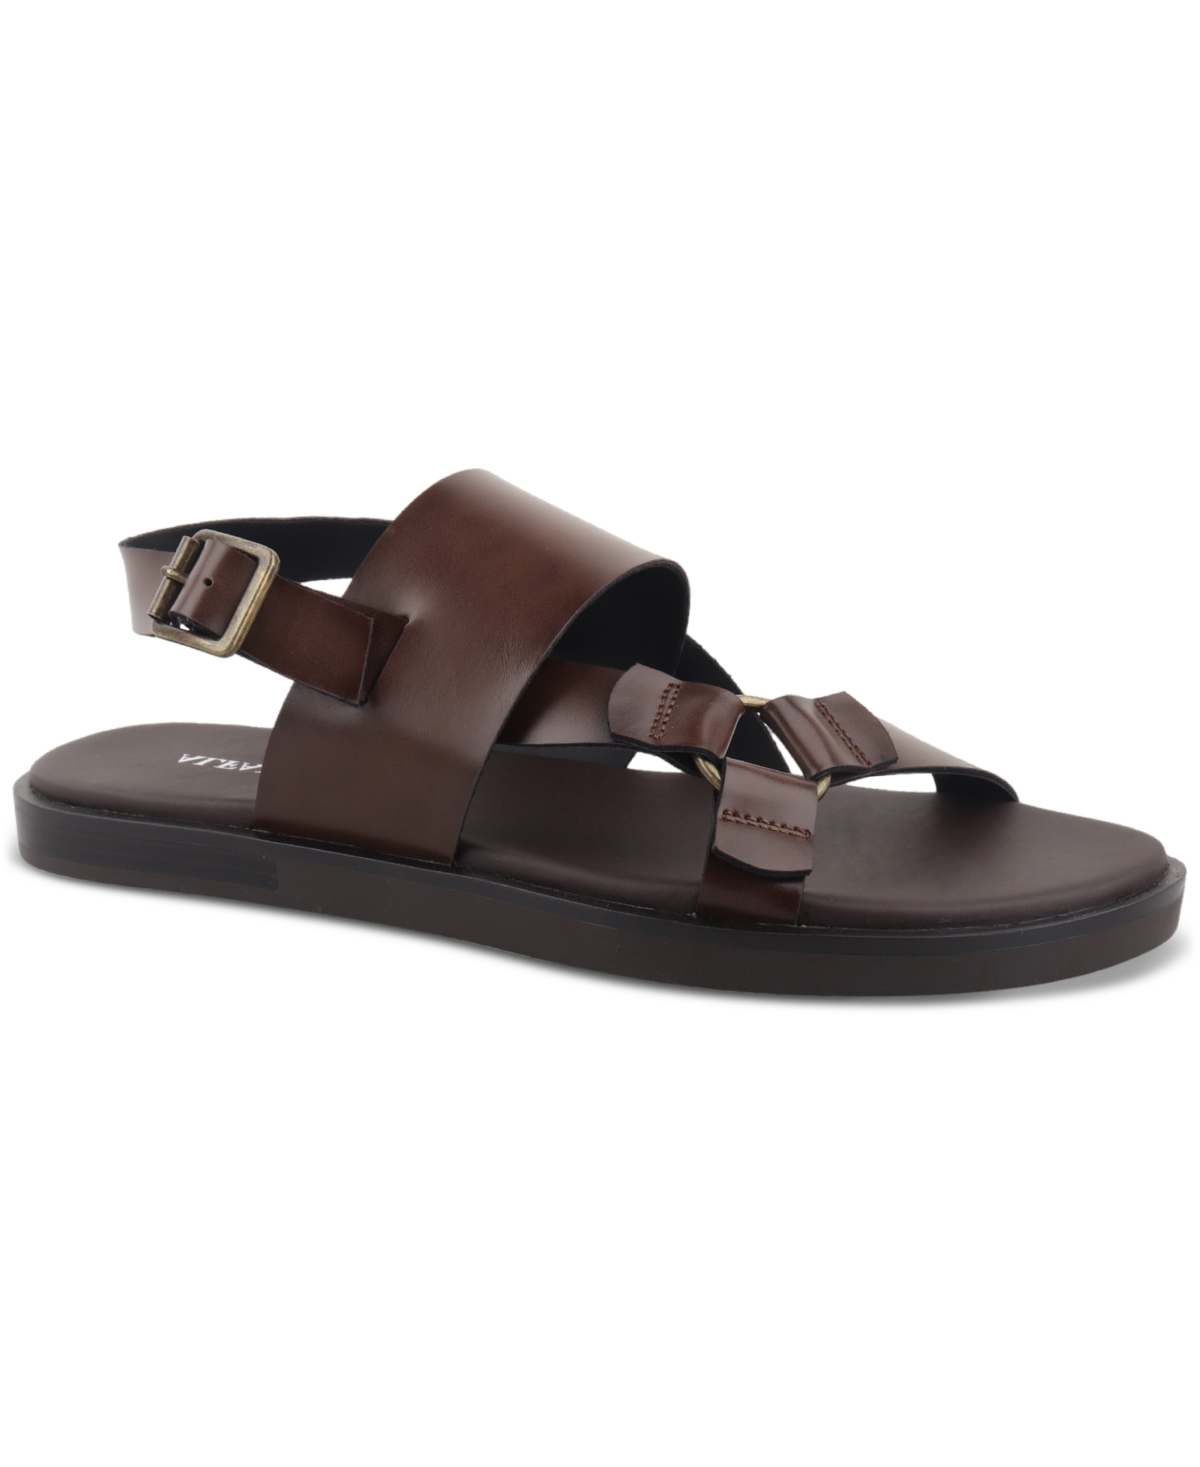 Men's Enzo Buckled-Strap Sandals Created for Macy's - Brown